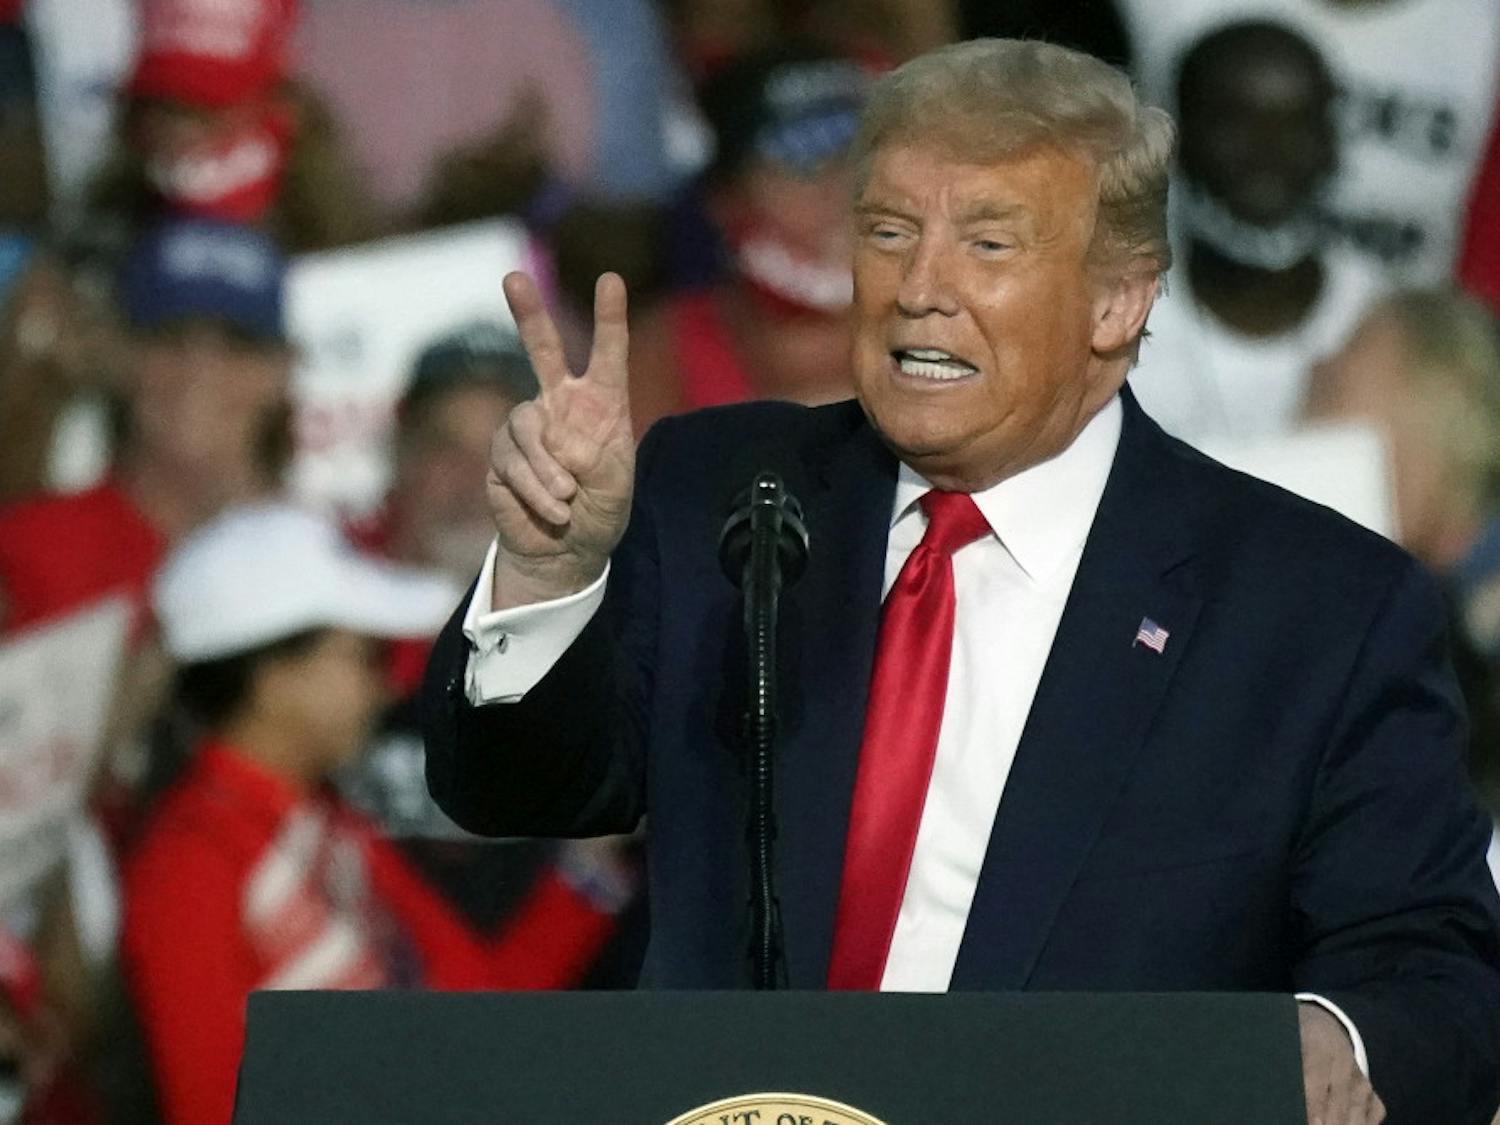 President Donald Trump speaks at a campaign rally at the Orlando Sanford International Airport Monday, Oct. 12, 2020, in Sanford, Fla.